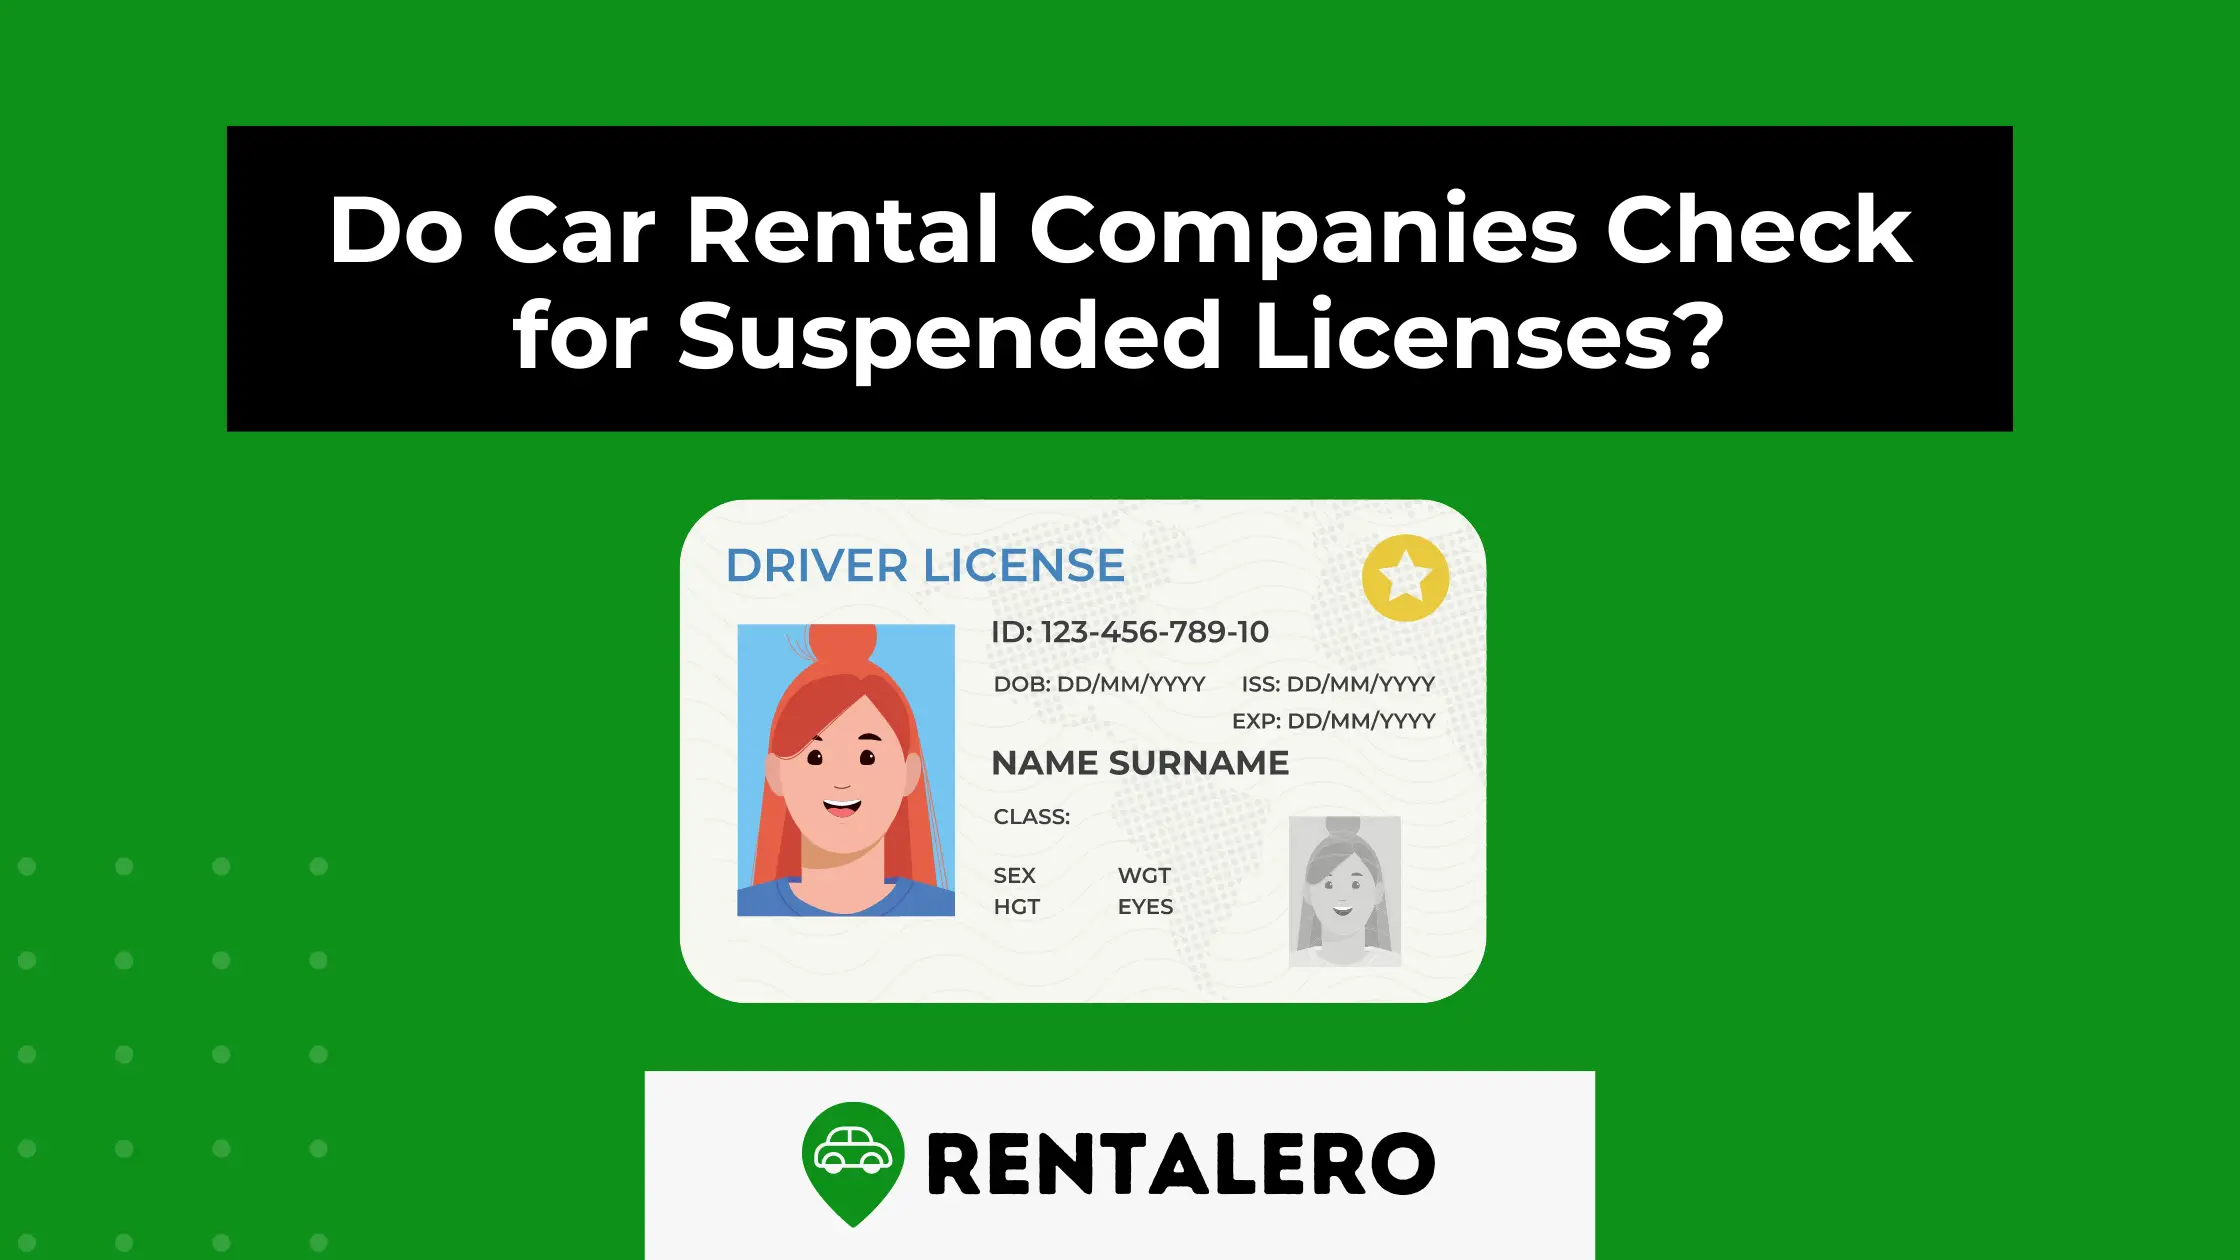 Do Car Rental Companies Check for Suspended Licenses?